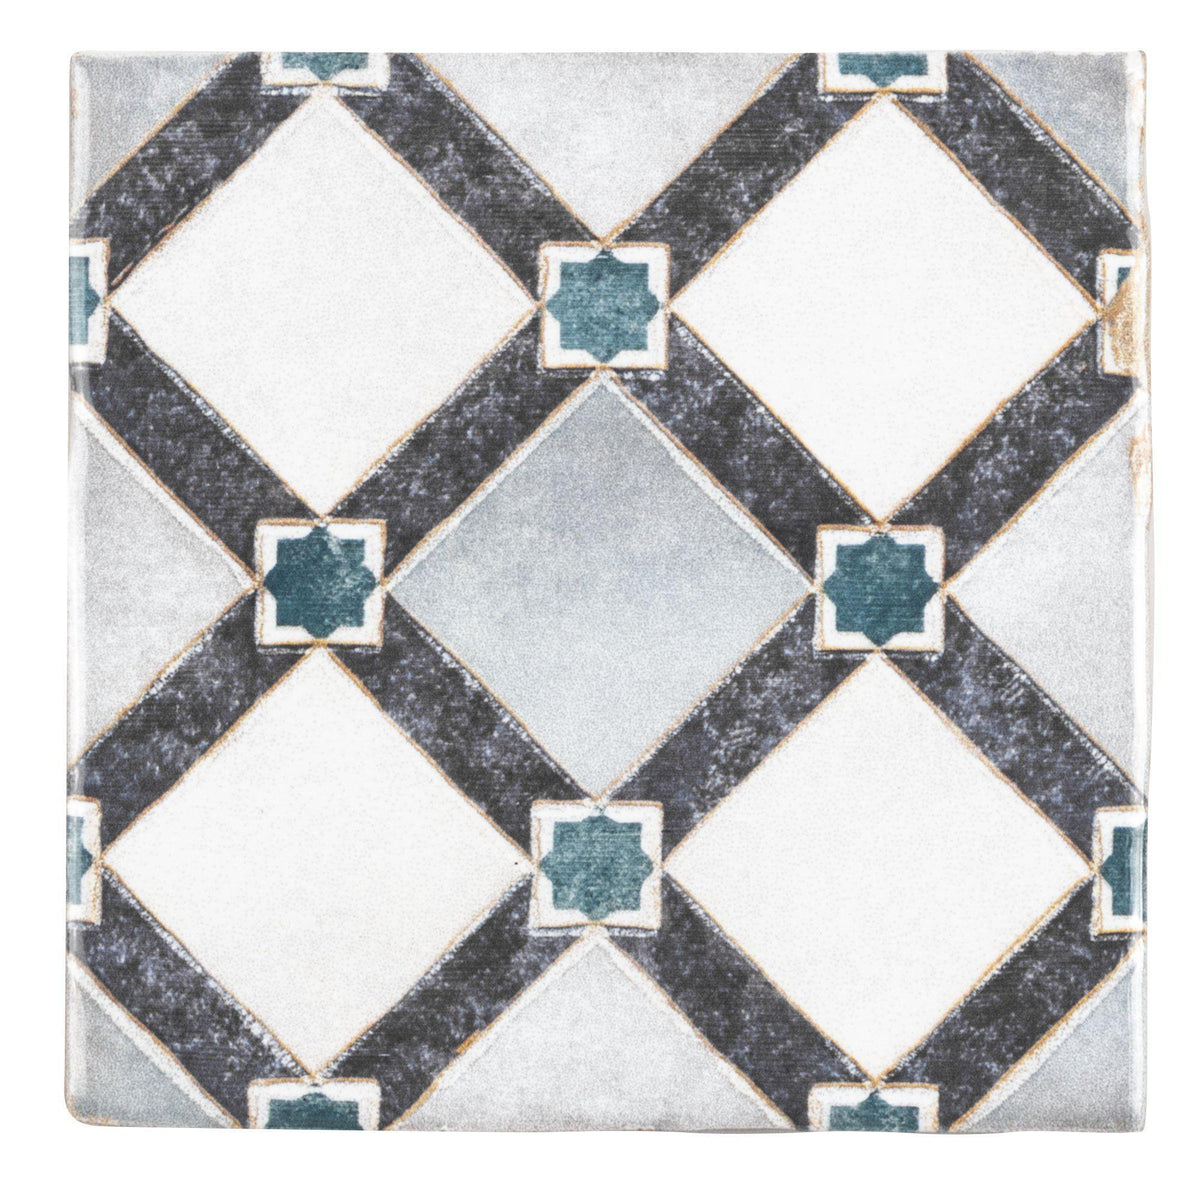 Mto0570 4x4 Blue White Multi Pattern Distressed Glossy Ceramic Tile,Tiny House For Sale With Land Nc